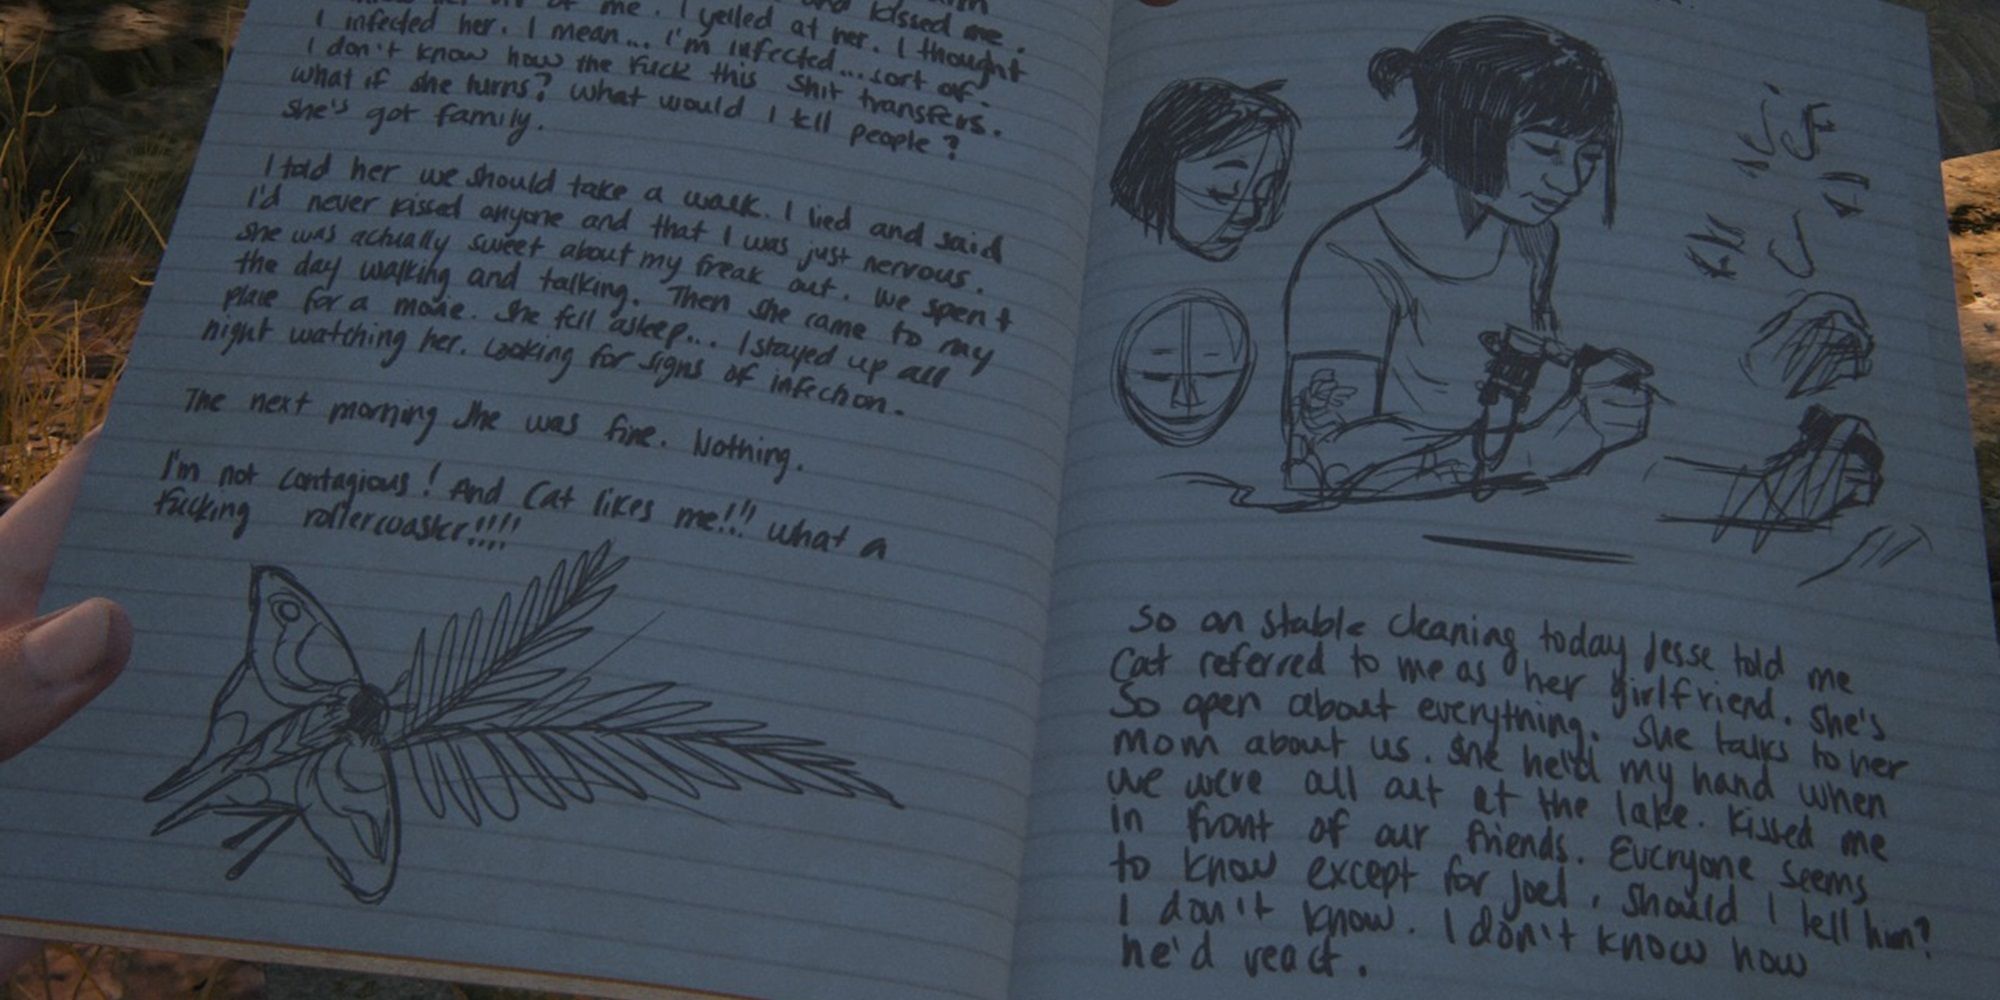 Ellie's journal entry about Cat in The Last of Us Part II